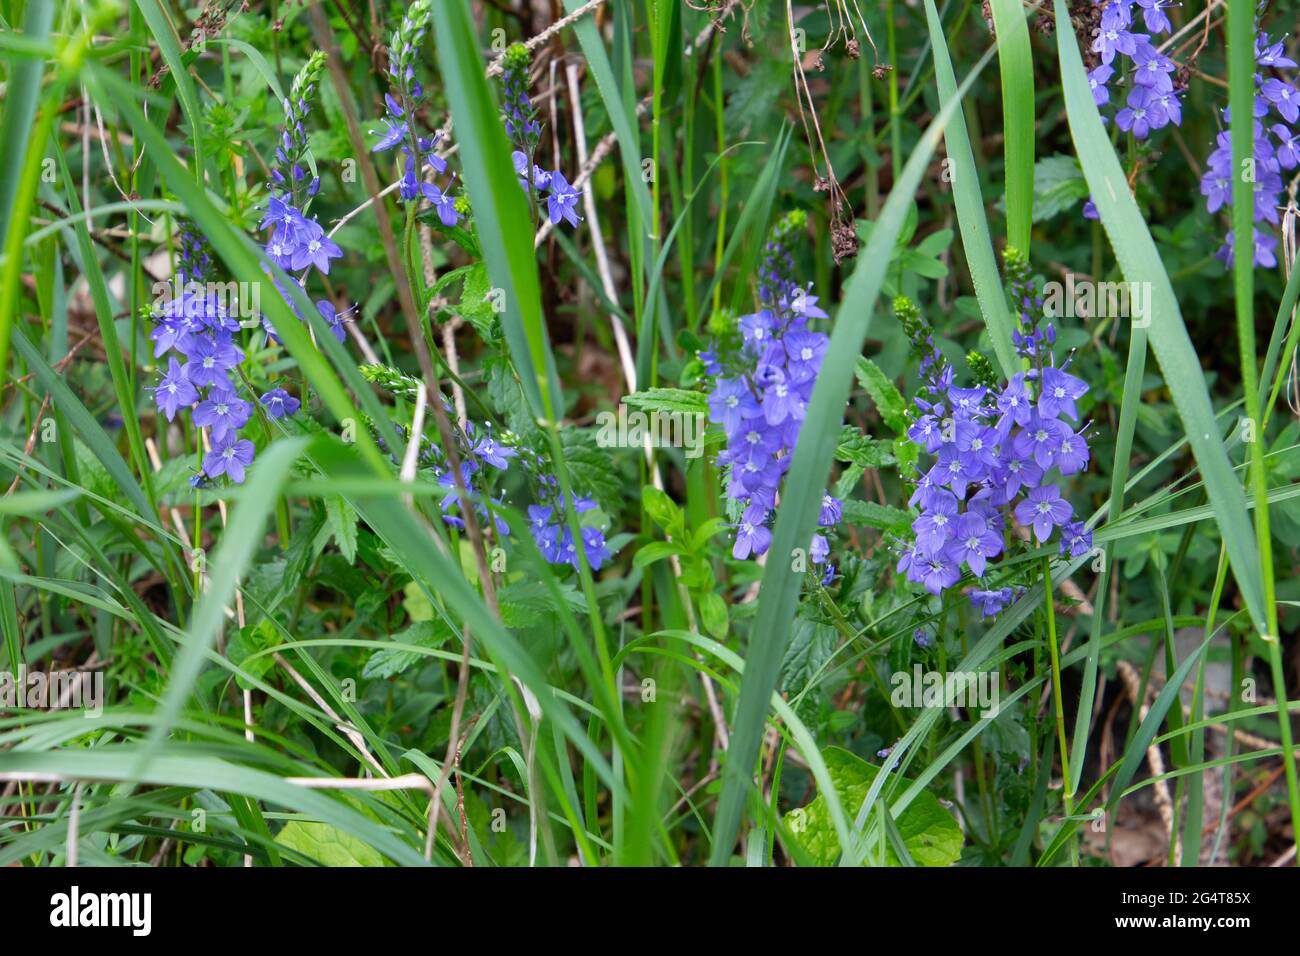 Blue large speedwell blooming in the grass, also called Veronica teucrium or grosser ehrenpreis Stock Photo